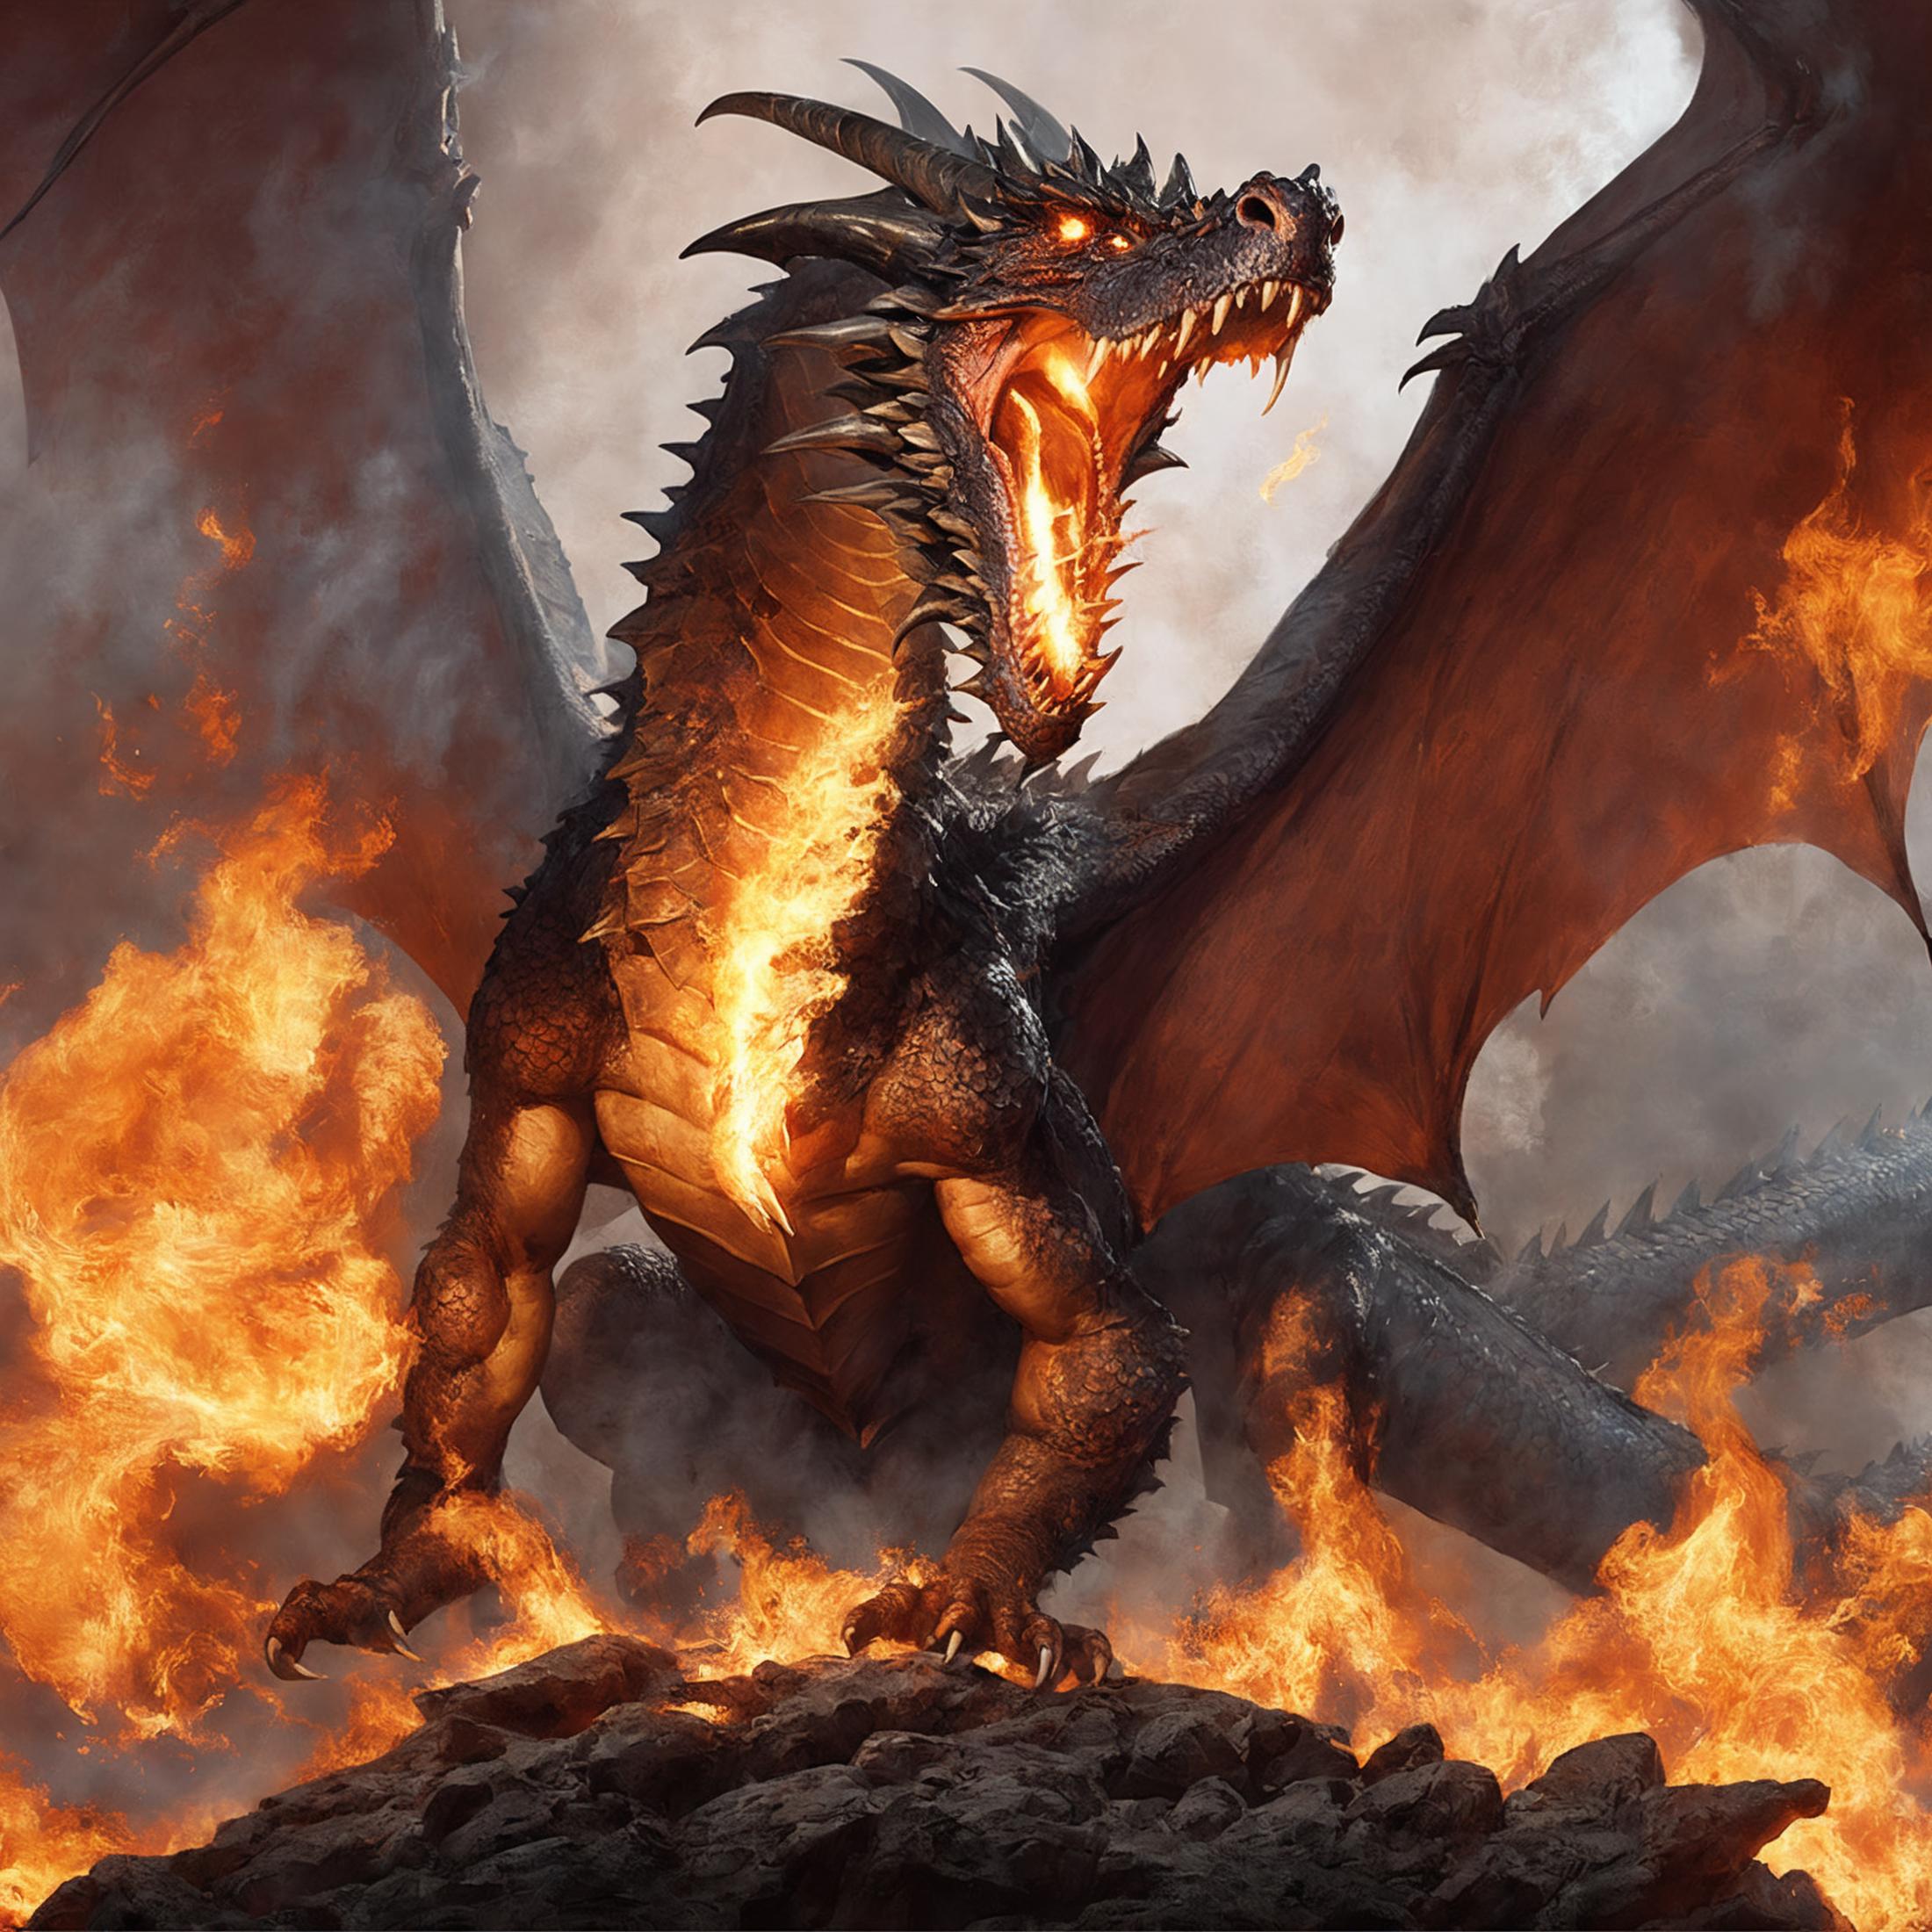 A dragon with fire and smoke around it, standing on a rock.